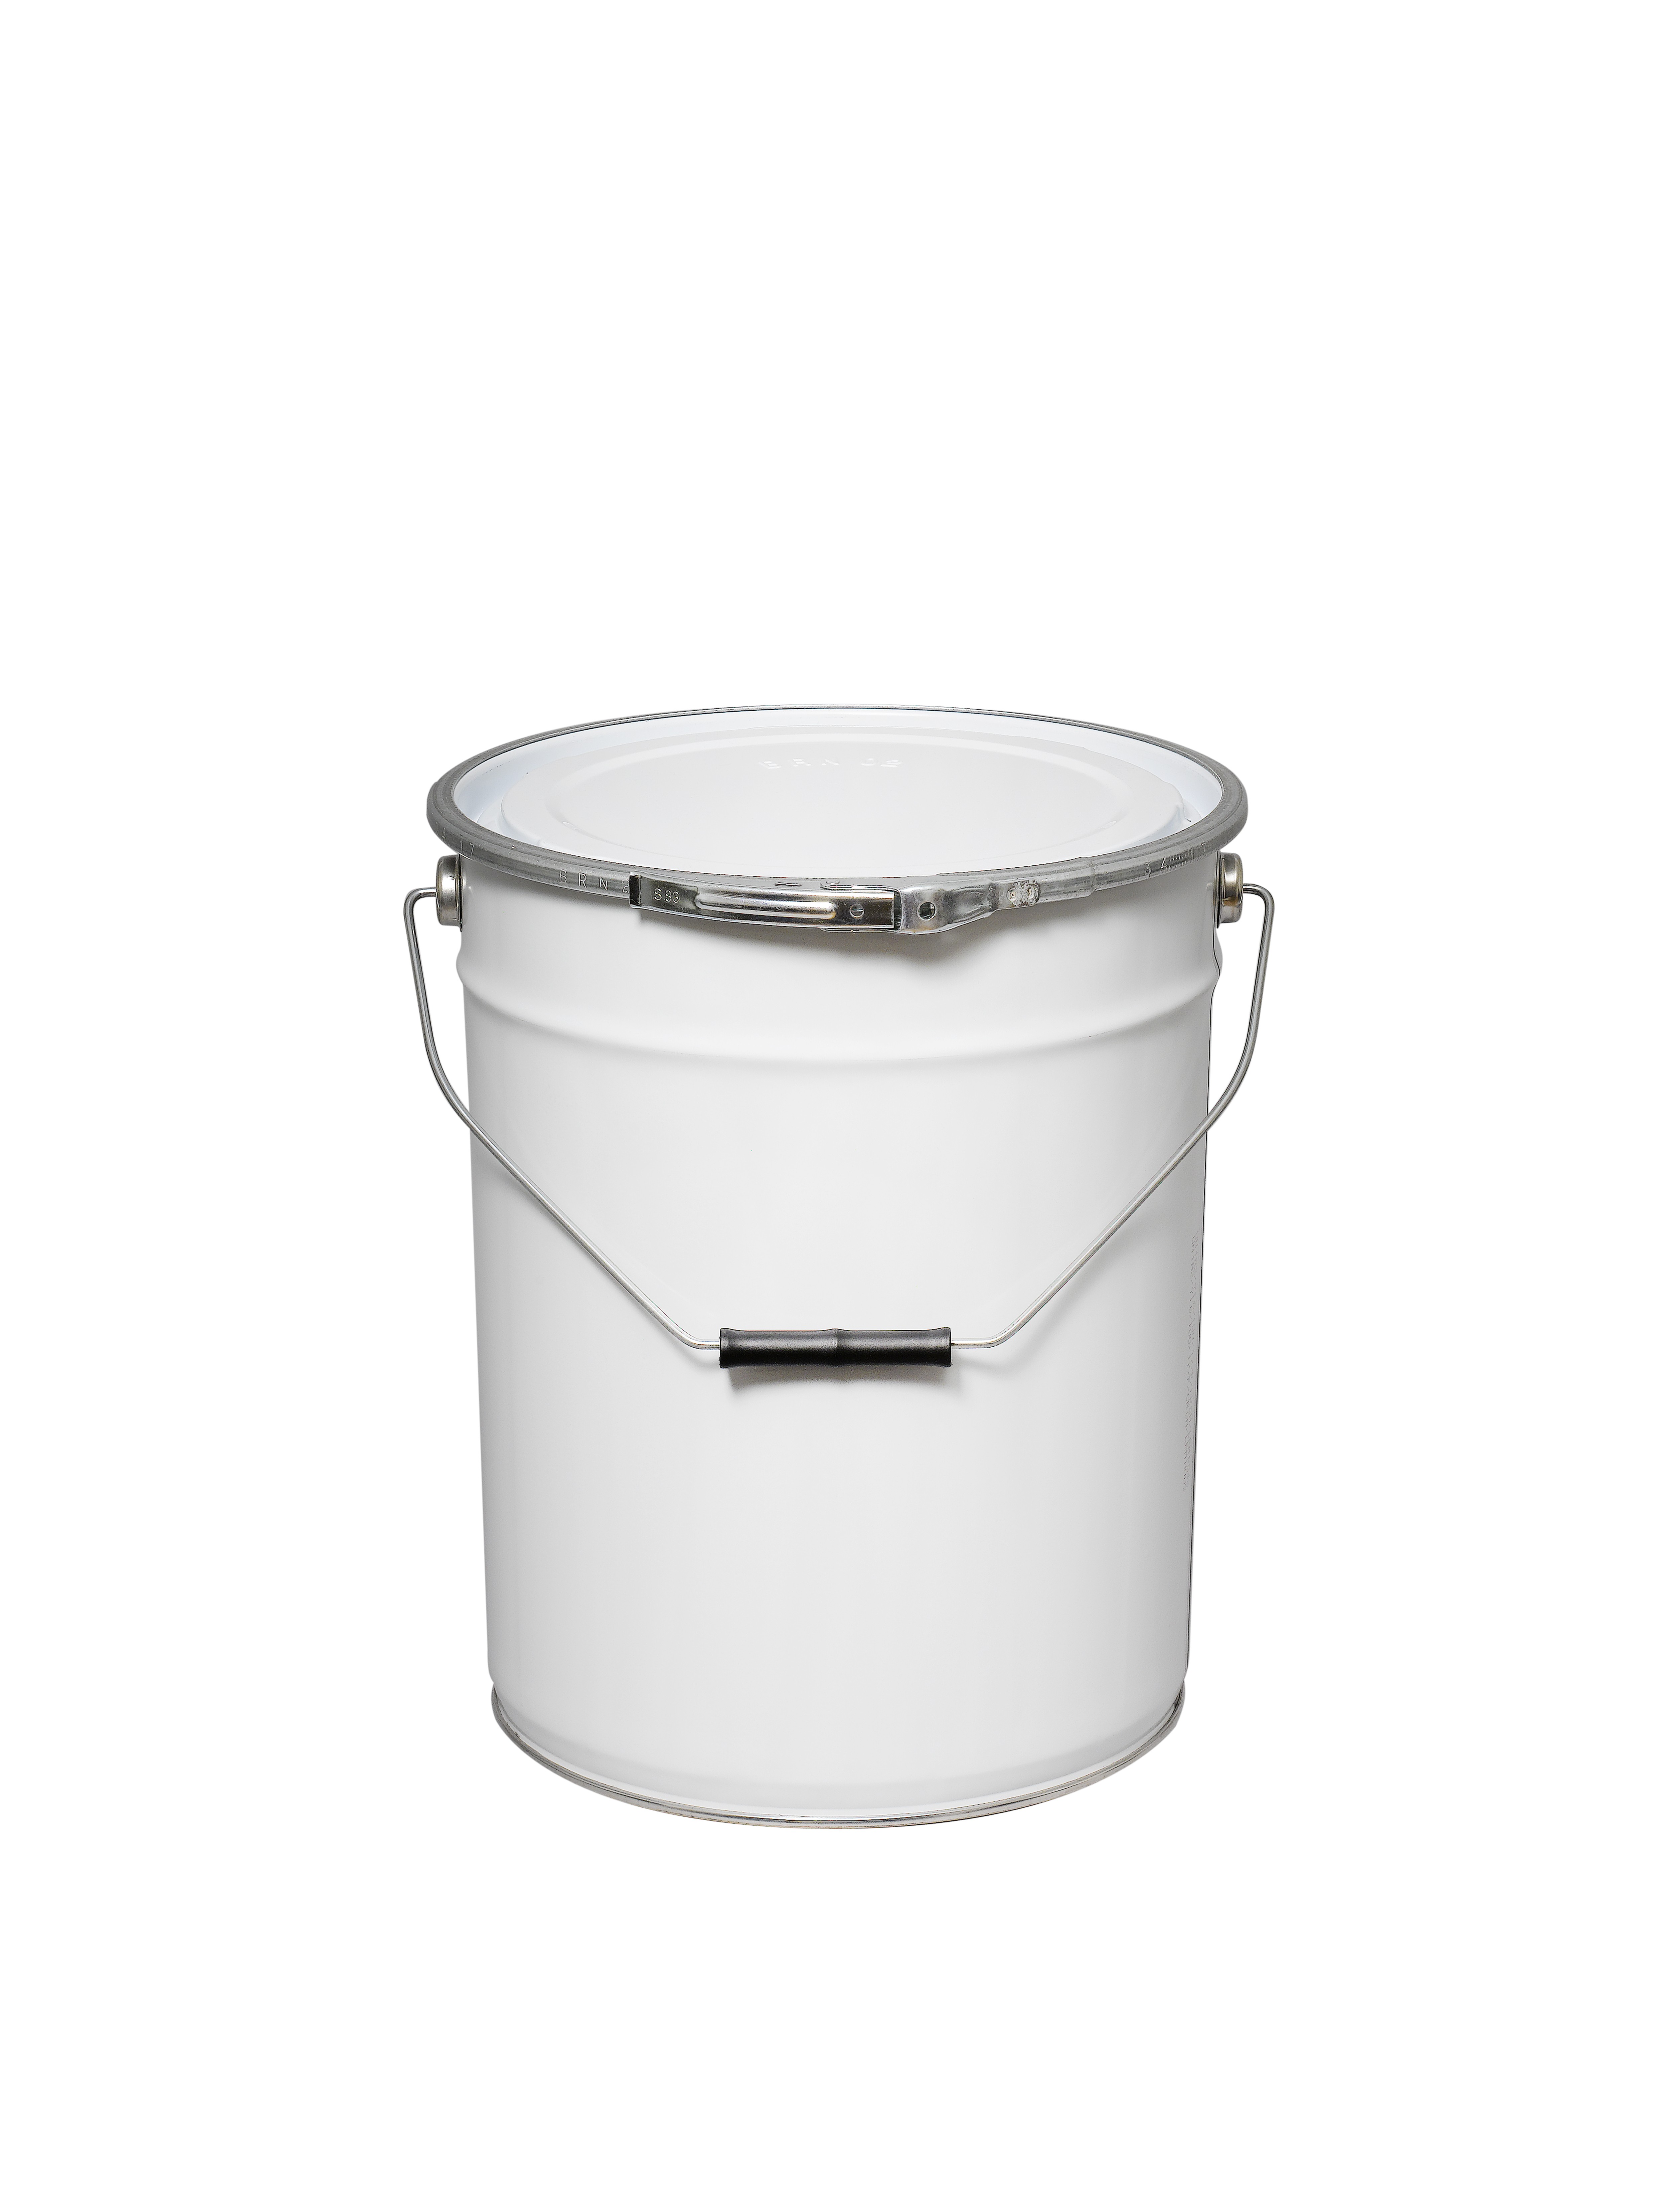 Download White 20l Metal Un Pail With Fastening Ring And Lid H O Plastics